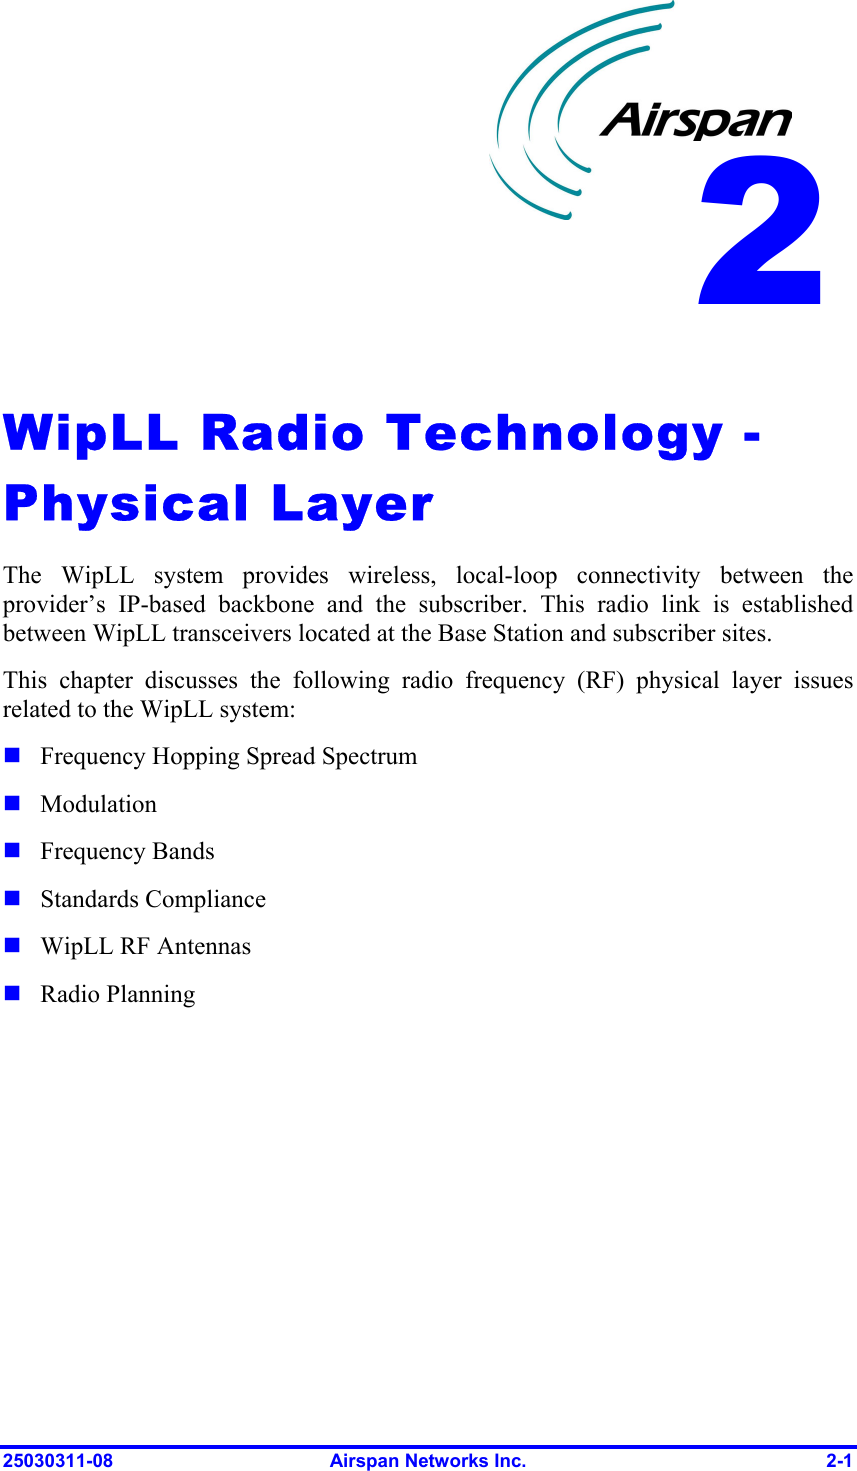  25030311-08  Airspan Networks Inc.  2-1  WipLL Radio Technology - Physical Layer The WipLL system provides wireless, local-loop connectivity between the provider’s IP-based backbone and the subscriber. This radio link is established between WipLL transceivers located at the Base Station and subscriber sites.  This chapter discusses the following radio frequency (RF) physical layer issues related to the WipLL system:  Frequency Hopping Spread Spectrum  Modulation  Frequency Bands  Standards Compliance  WipLL RF Antennas  Radio Planning 2 